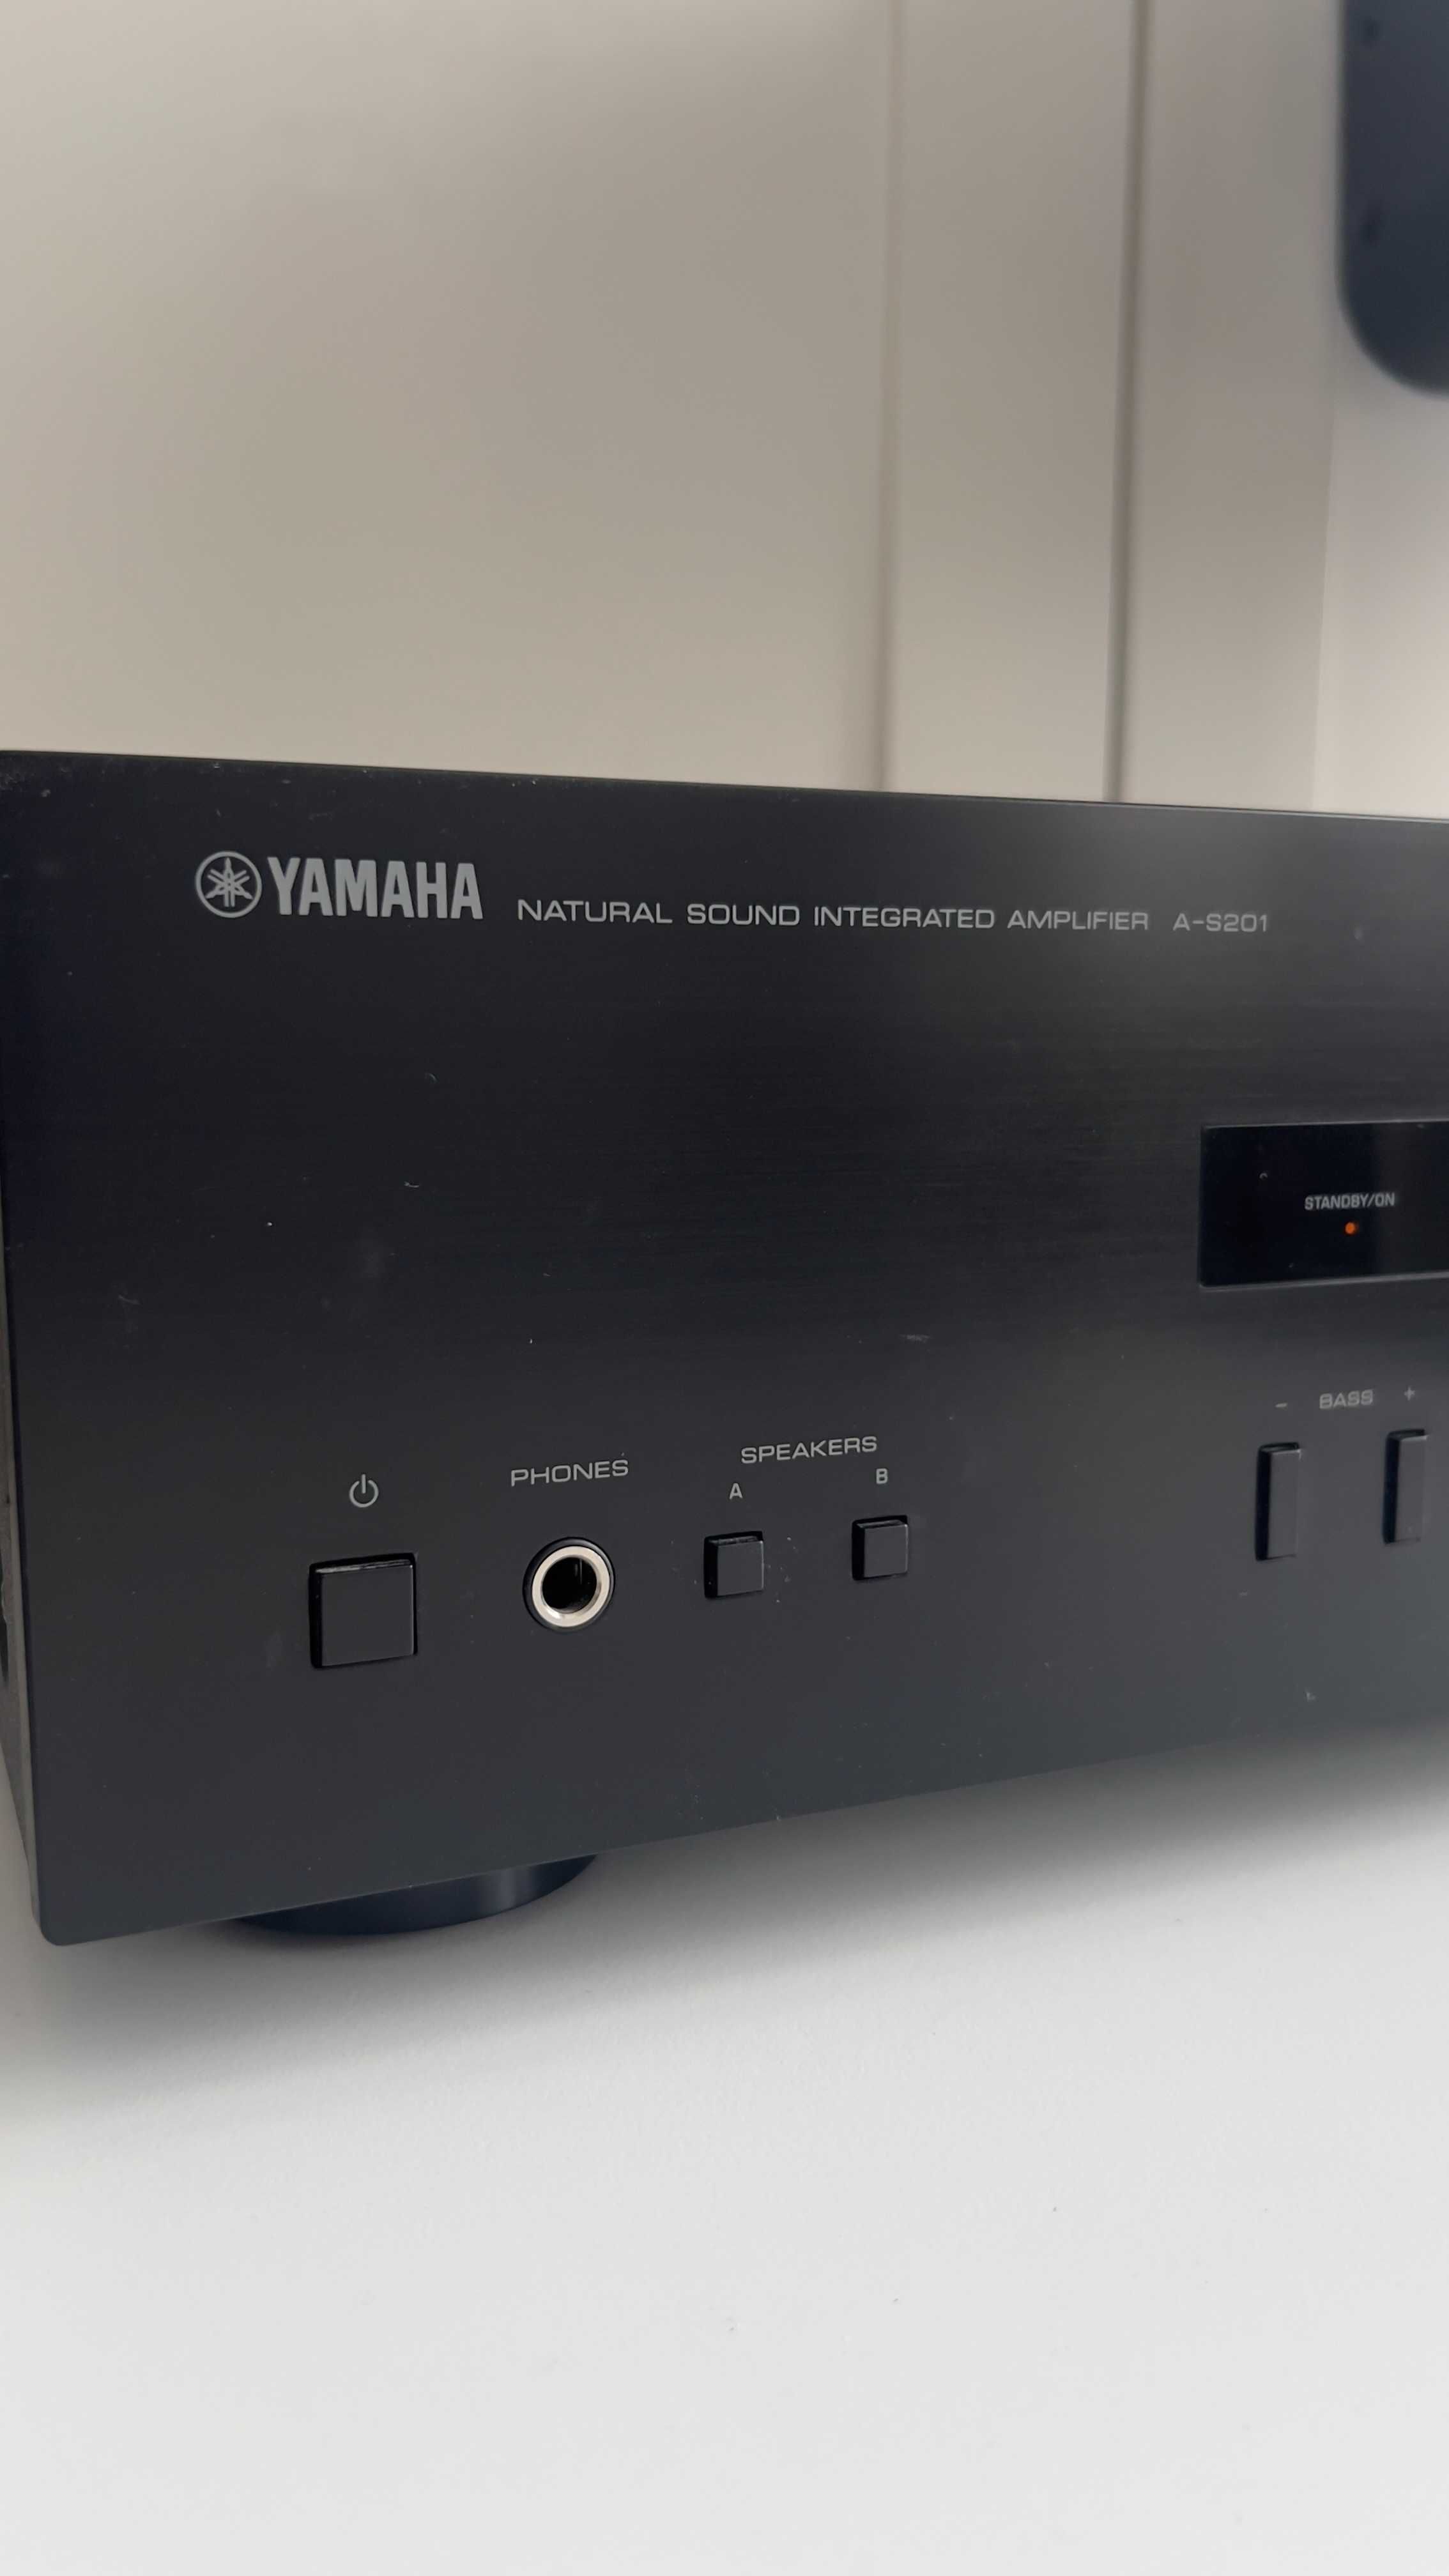 Yamaha A-S201 without remote control